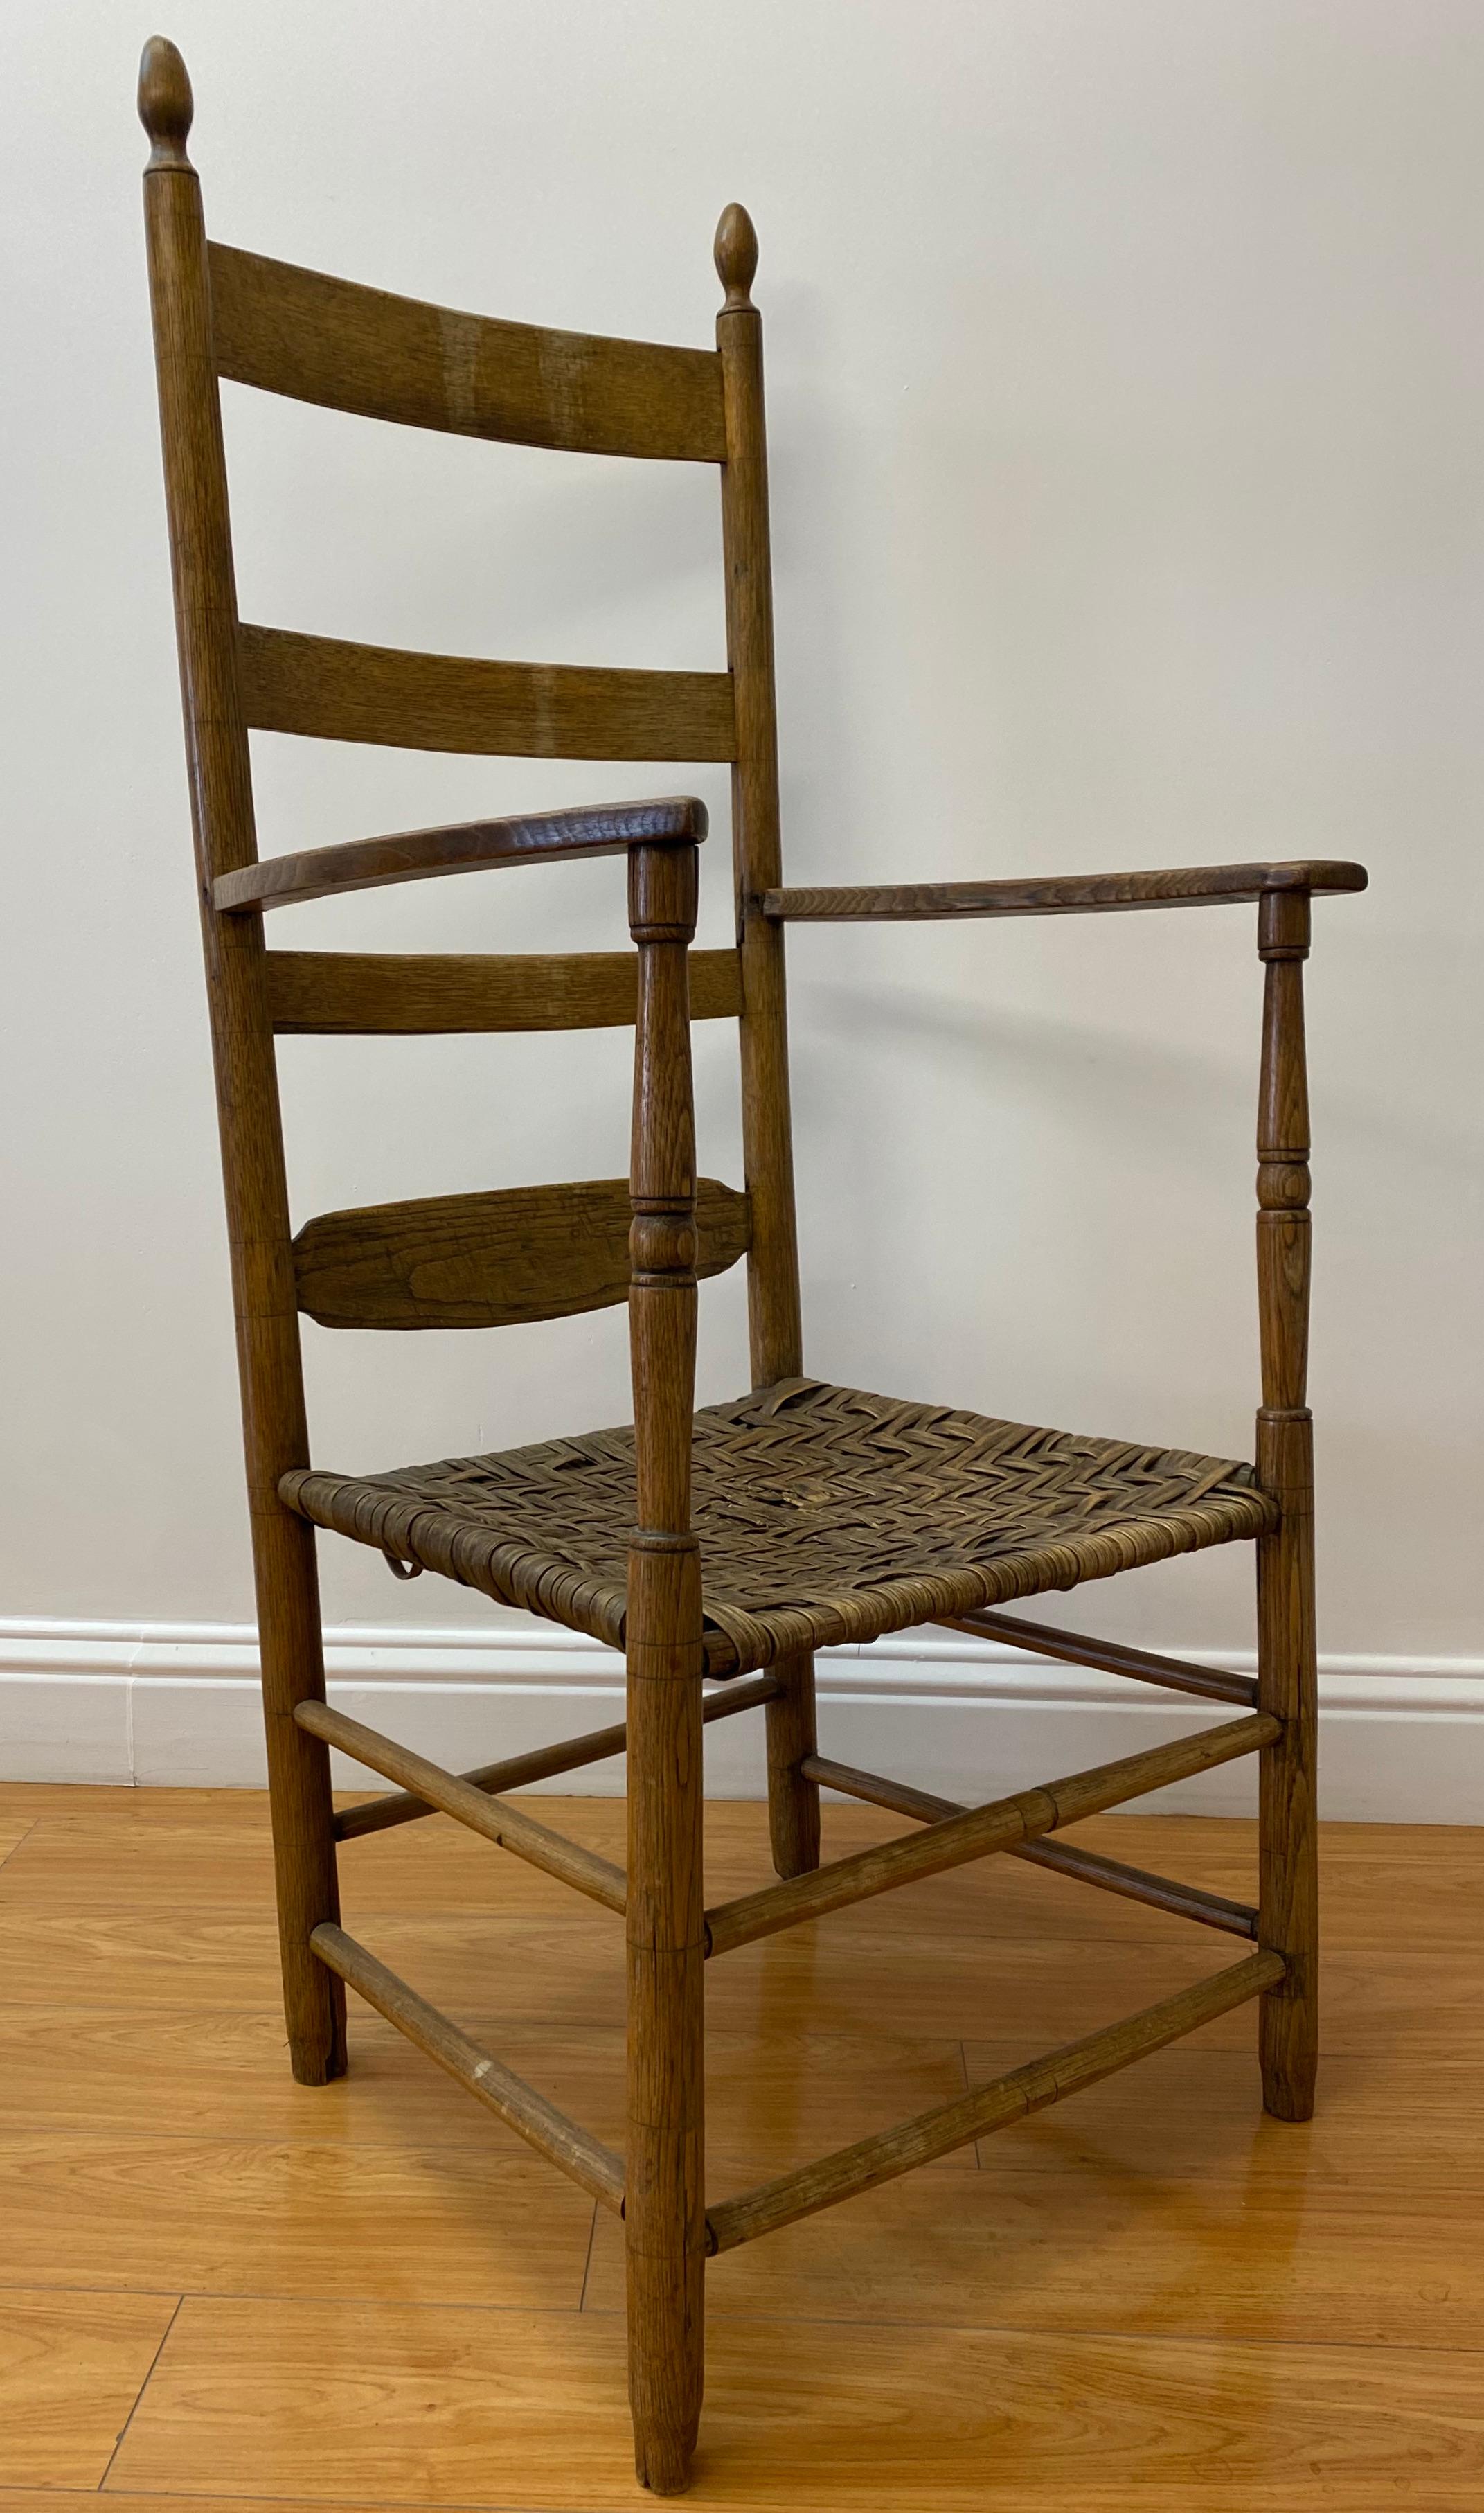 18th to 19th century ladder back chair with reed seat.

Hand made antique ladder back arm chair with hand woven reed seat

Measures: 22